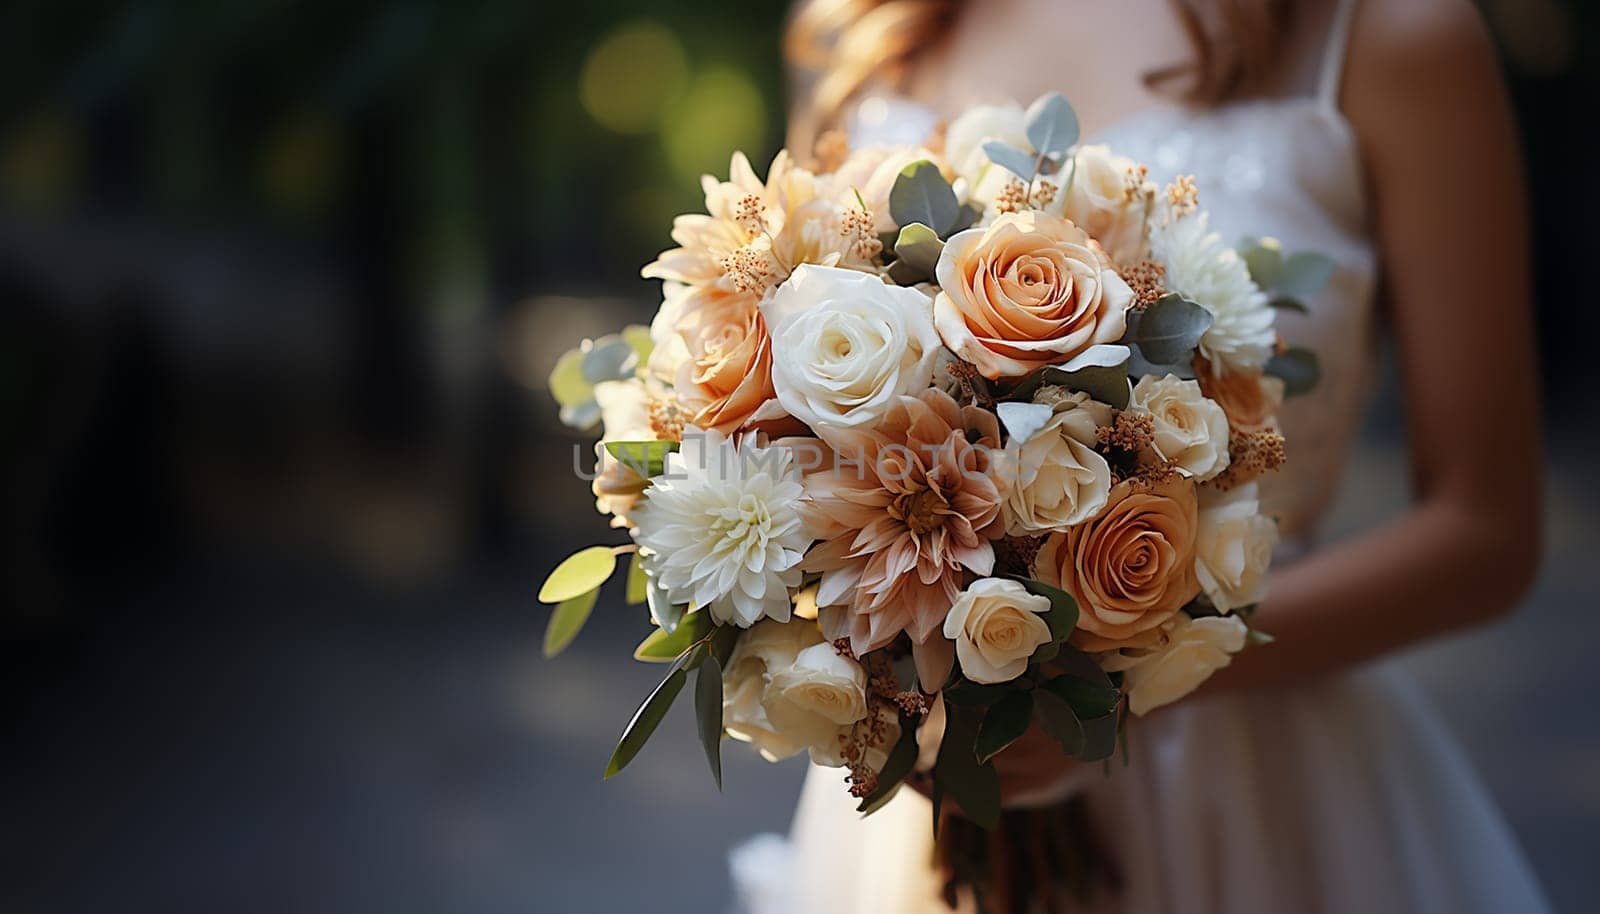 Stylish bride bouquet elegant. A beautiful wedding bouquet with orange roses in bride's hands. A woman in wedding dress holding flowers. Celebration style concept. Design element. Close up. Copy space. space for text